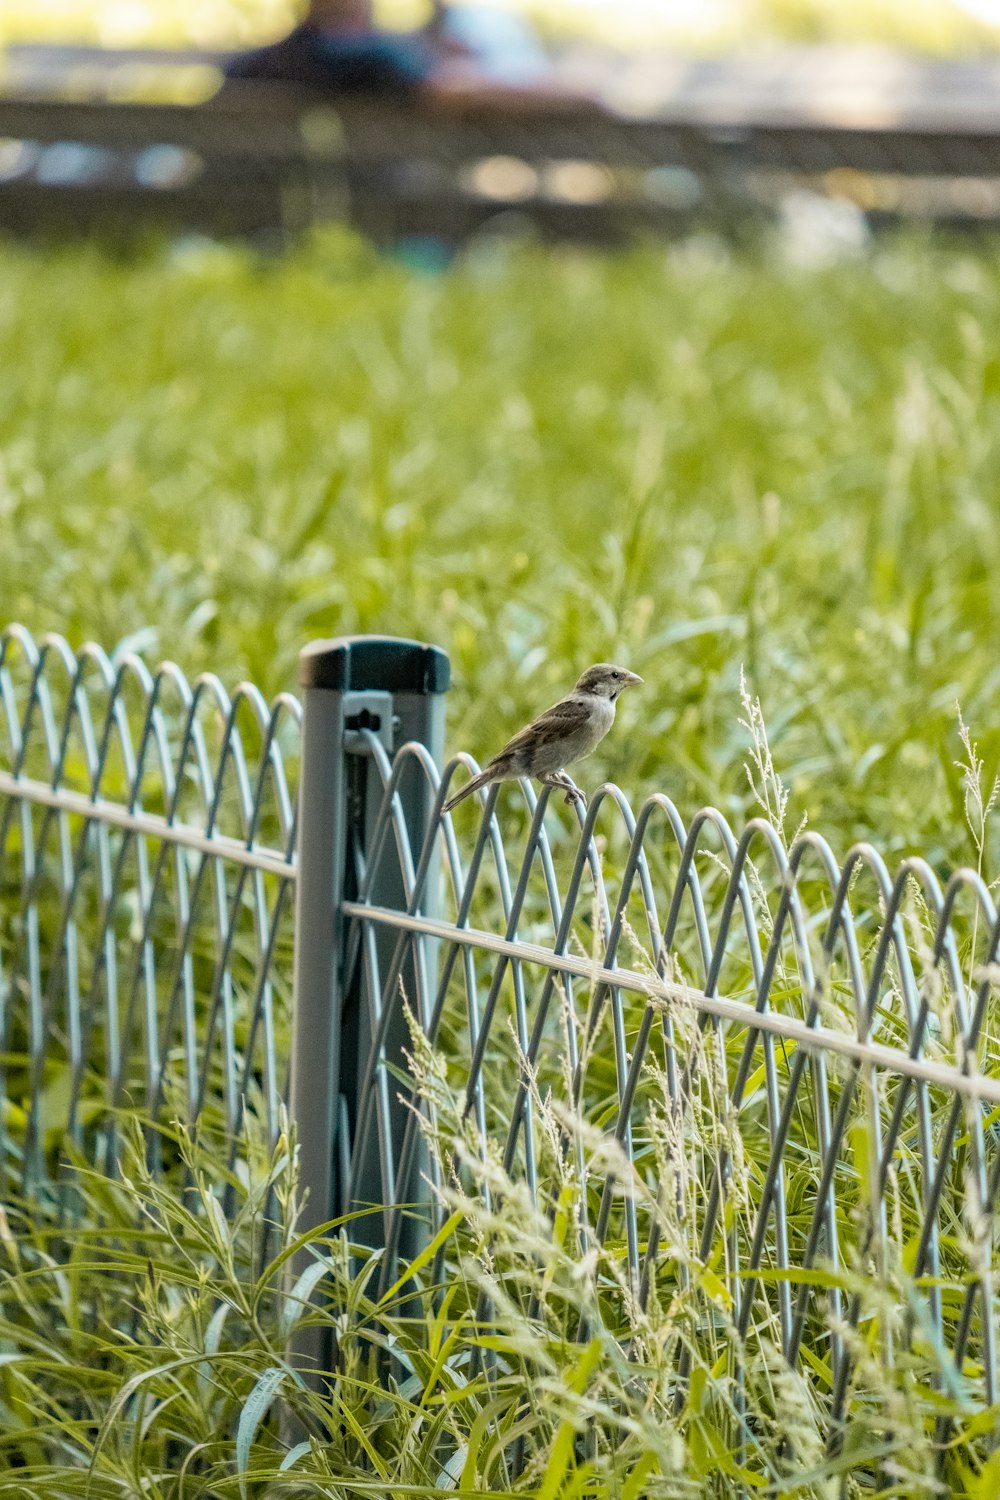 a small bird perched on top of a fence